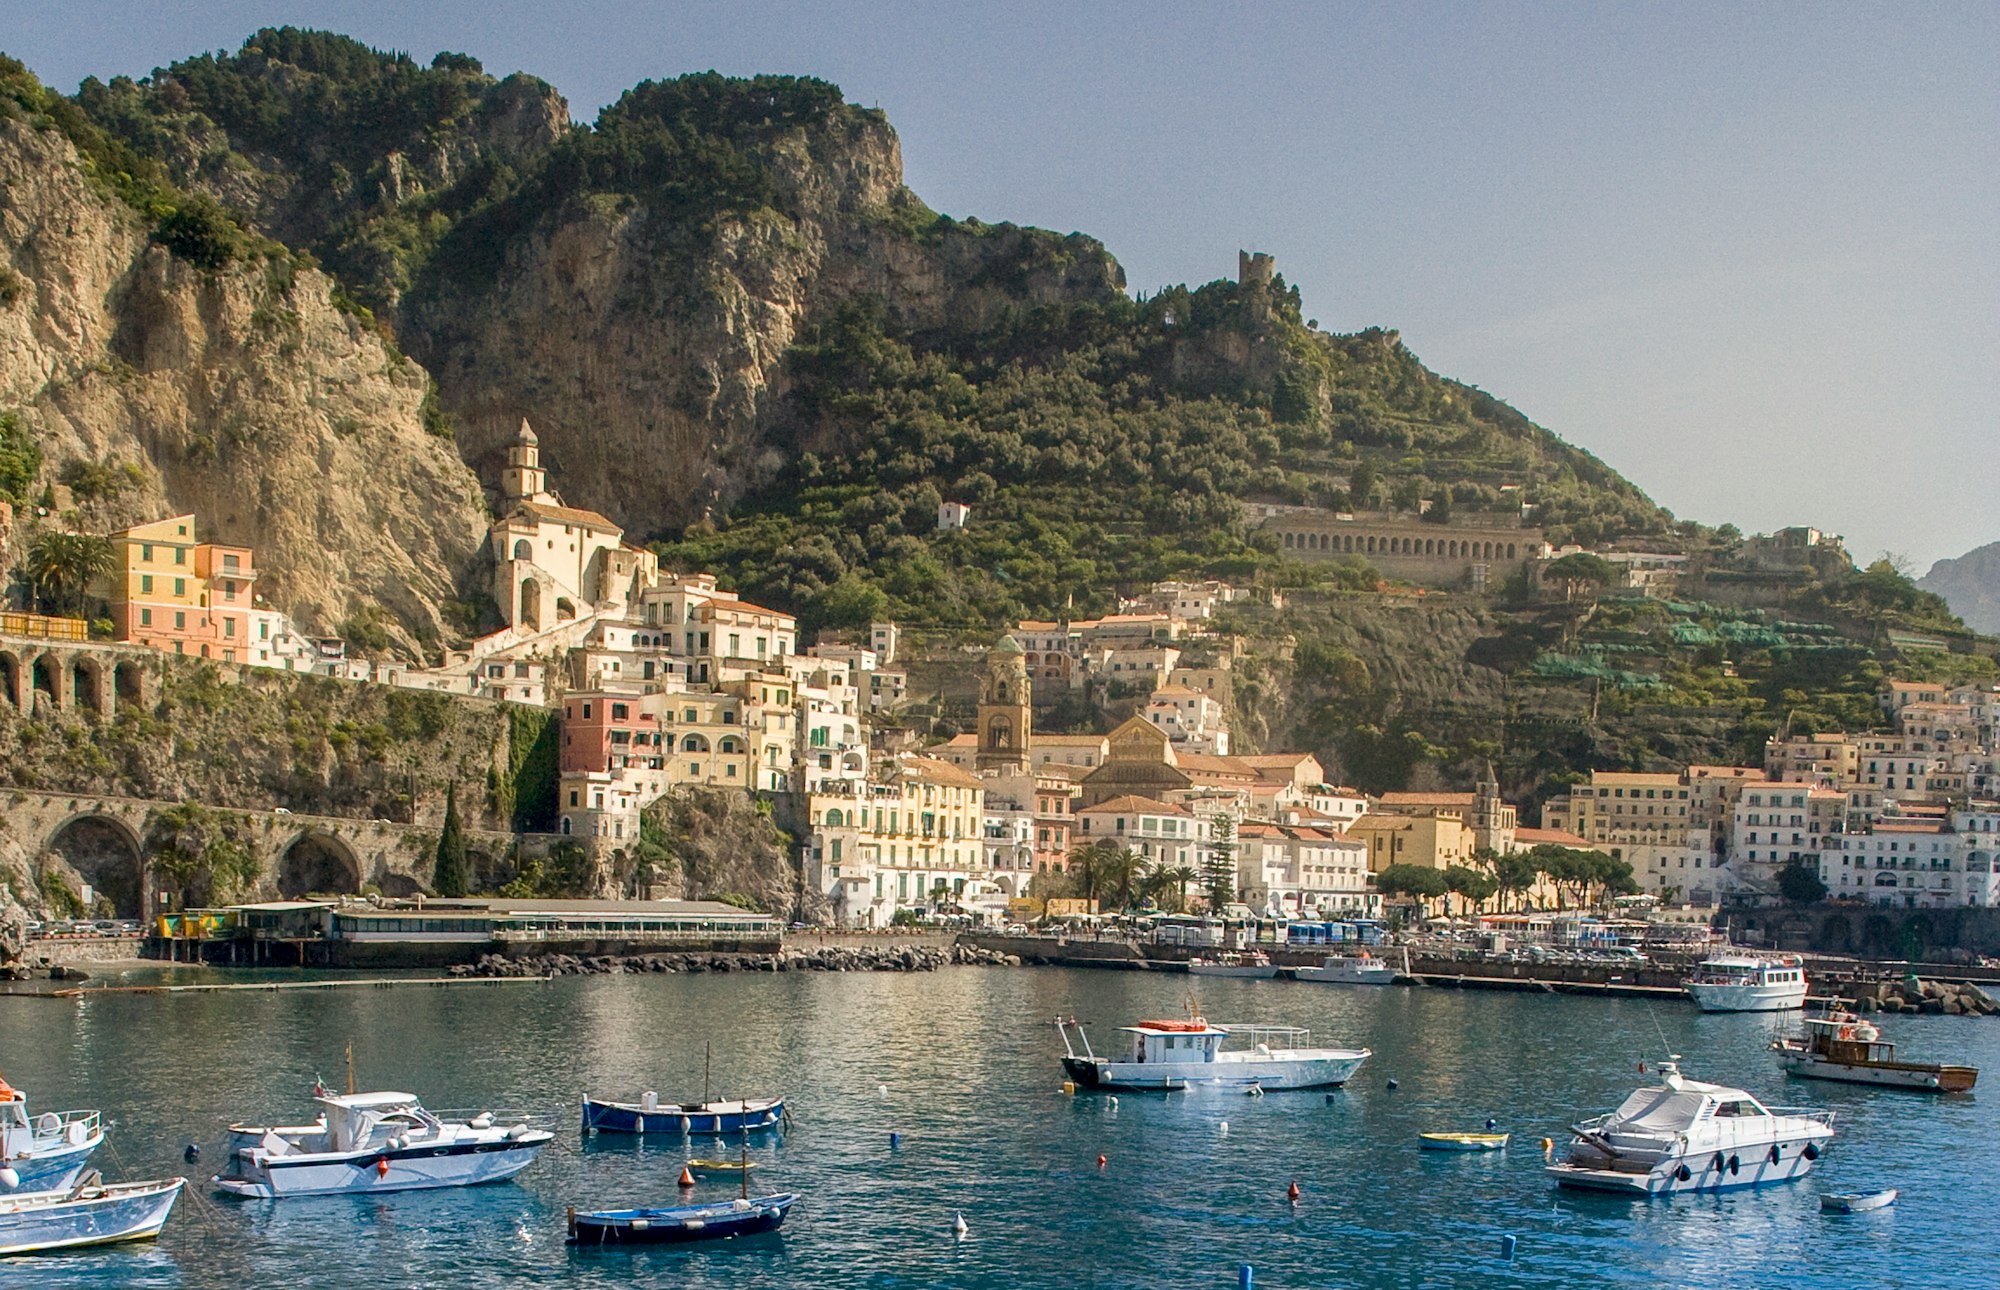 view of boats in amalfi harbor and town